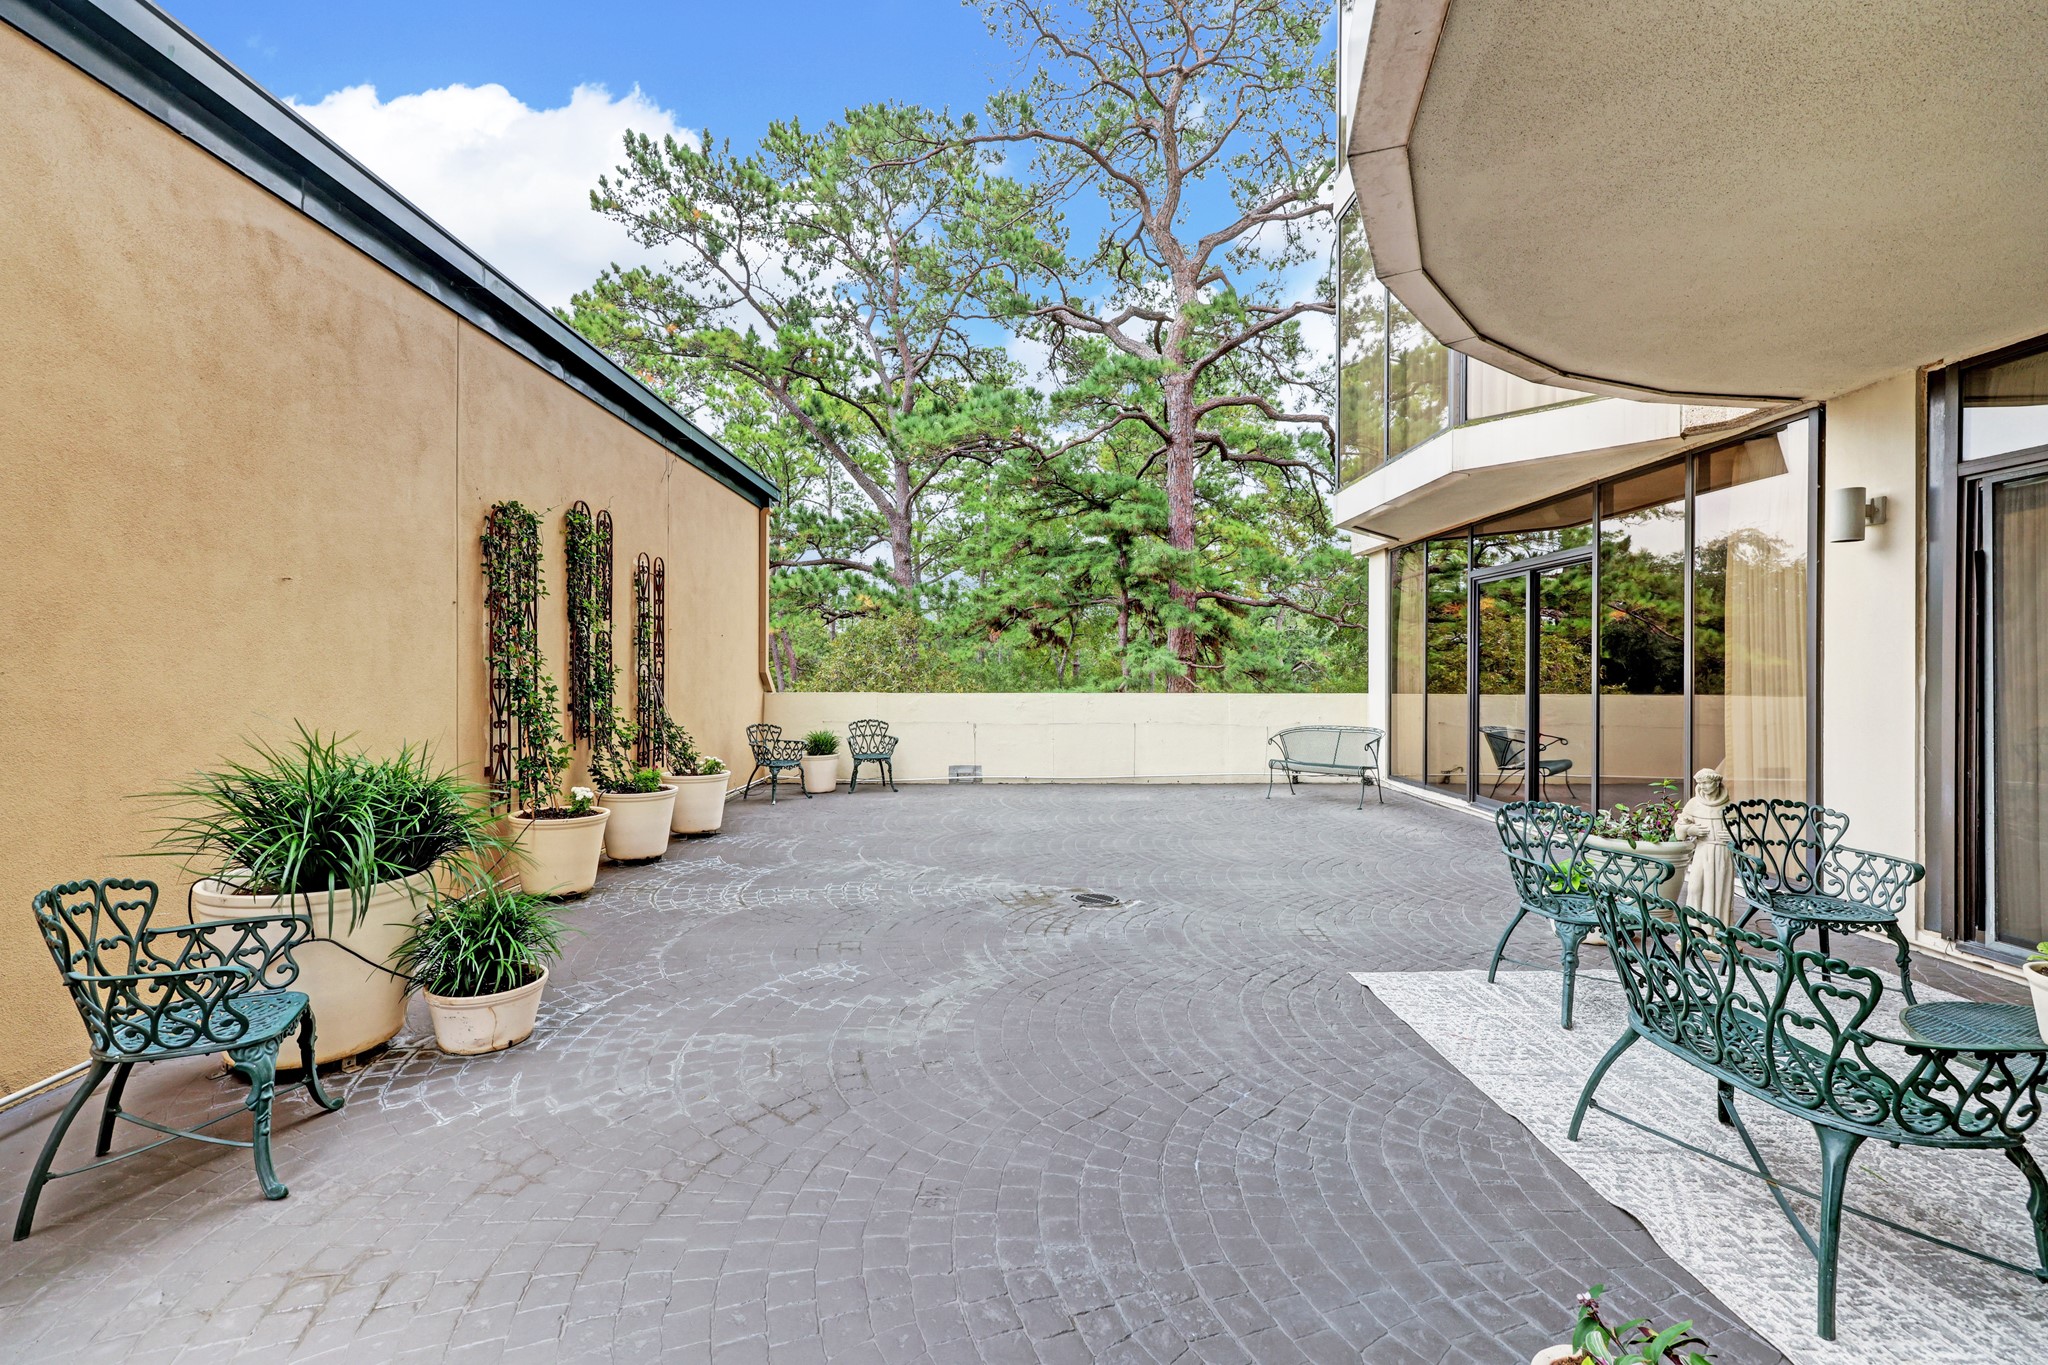 Outdoor patio area offers plenty of space to garden an enjoy the outdoors on peaceful patio.